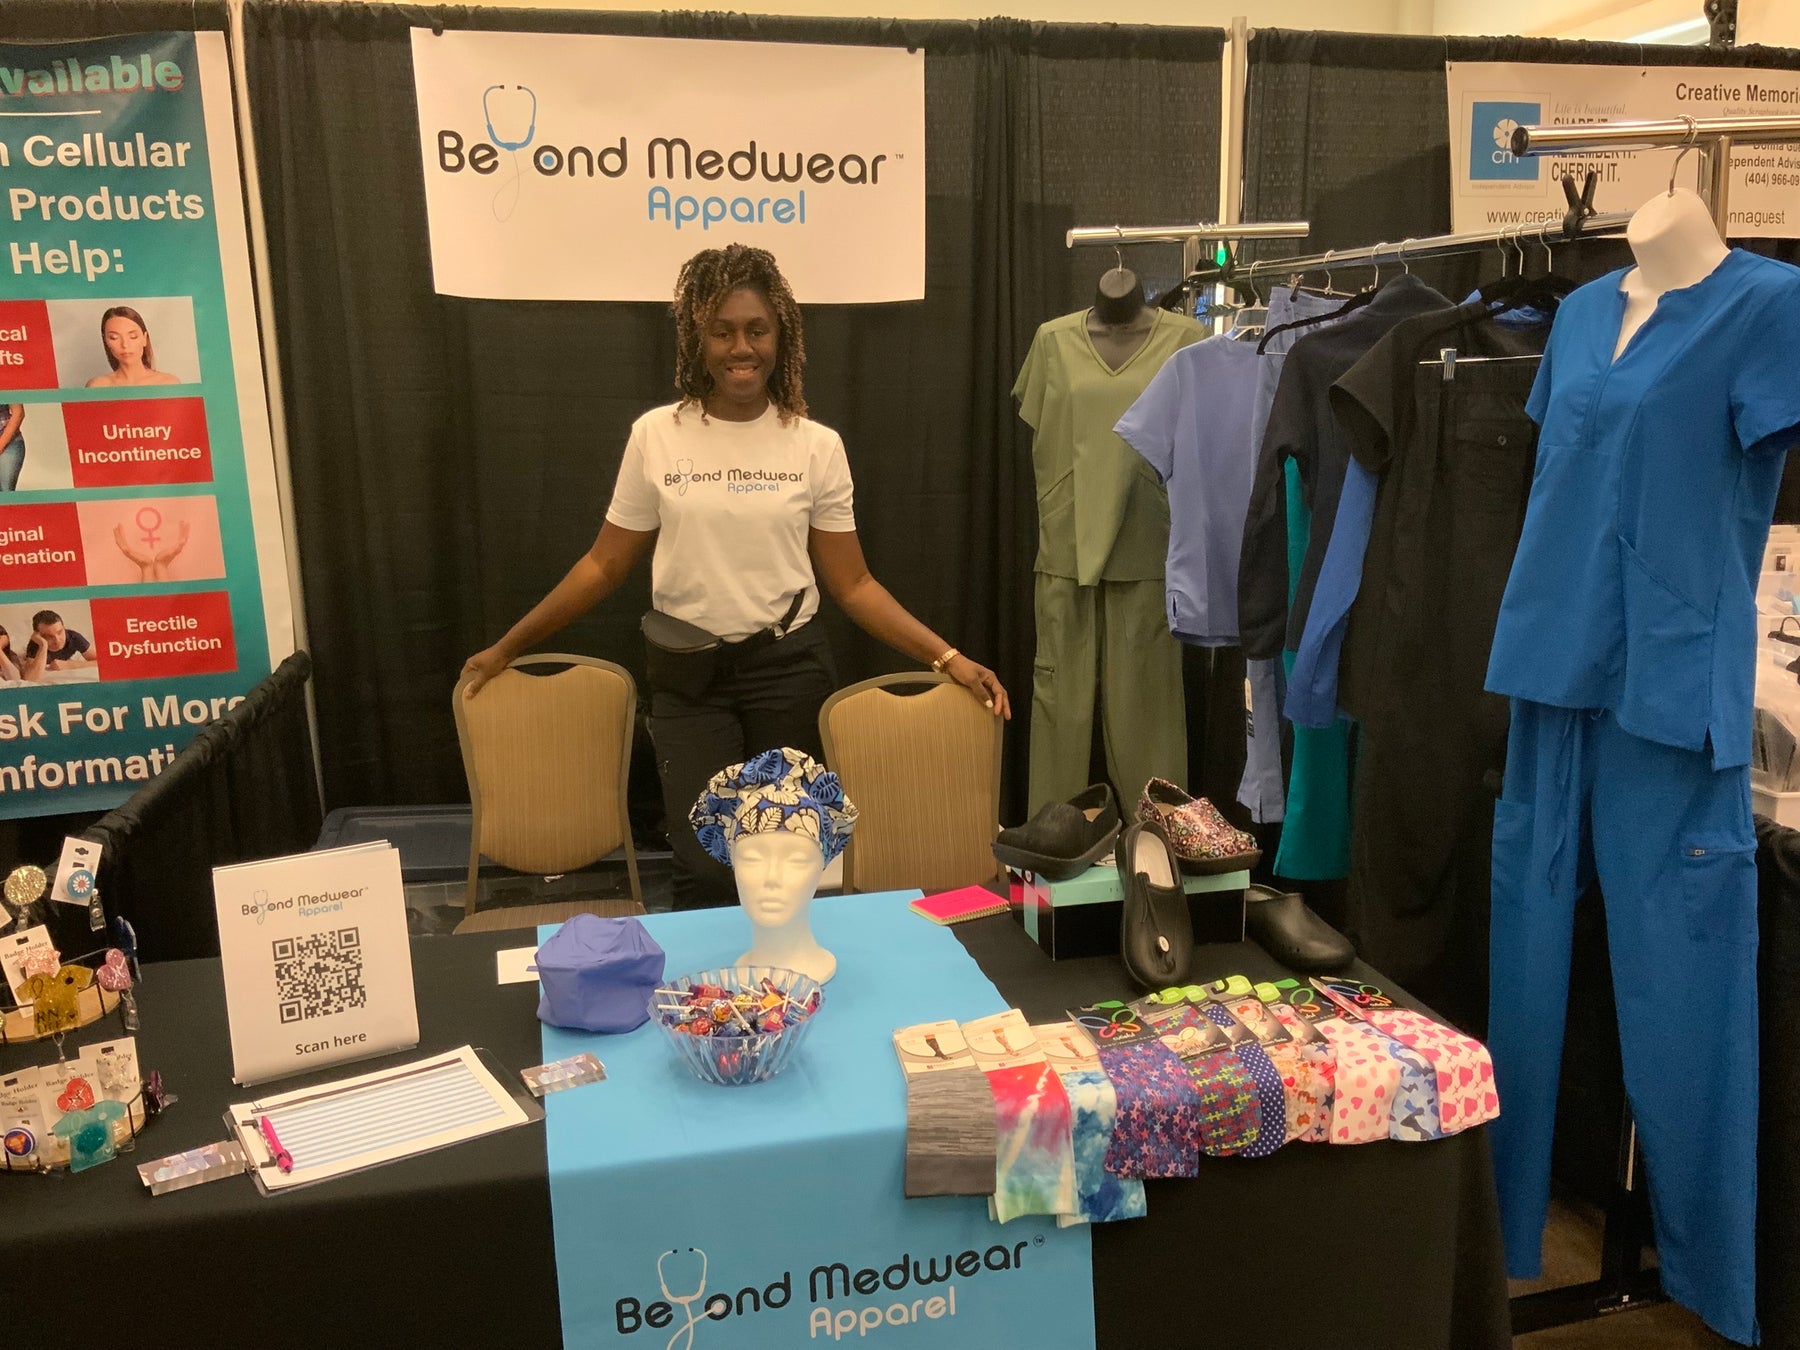 5 Things I Learned About Being A Vendor at an Expo!